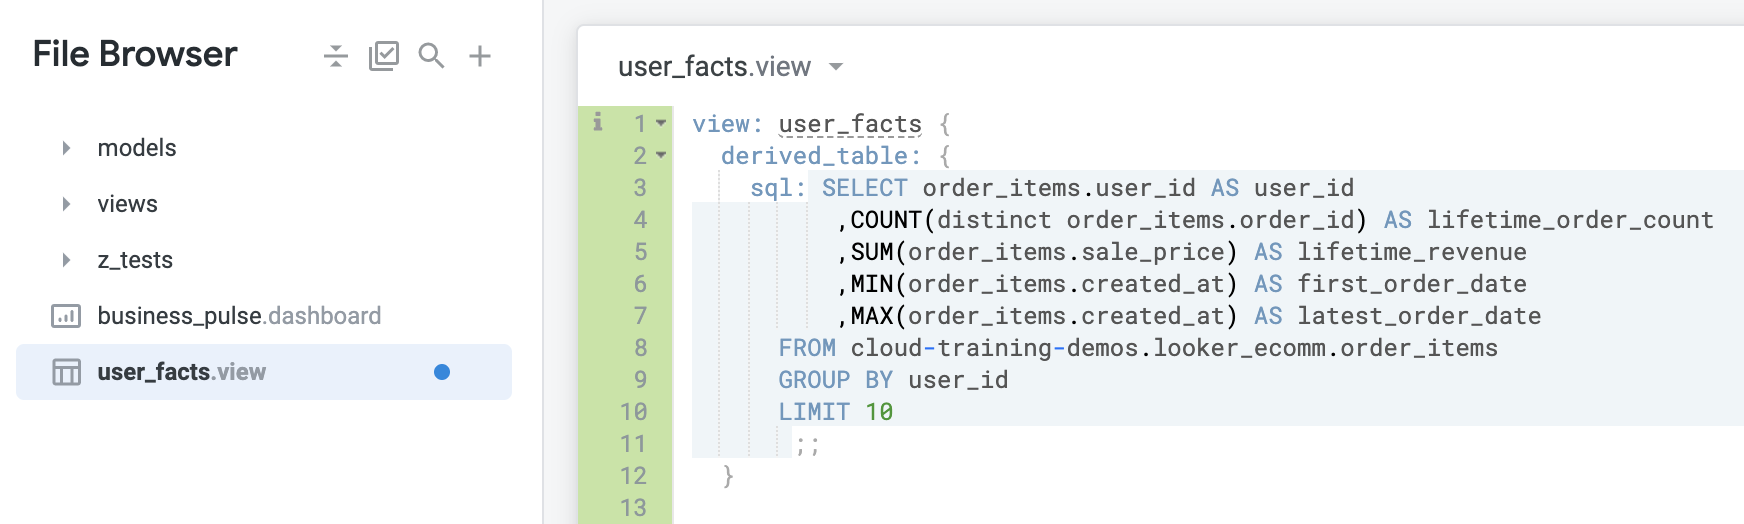 The user_facts.view displaying 10 lines of code